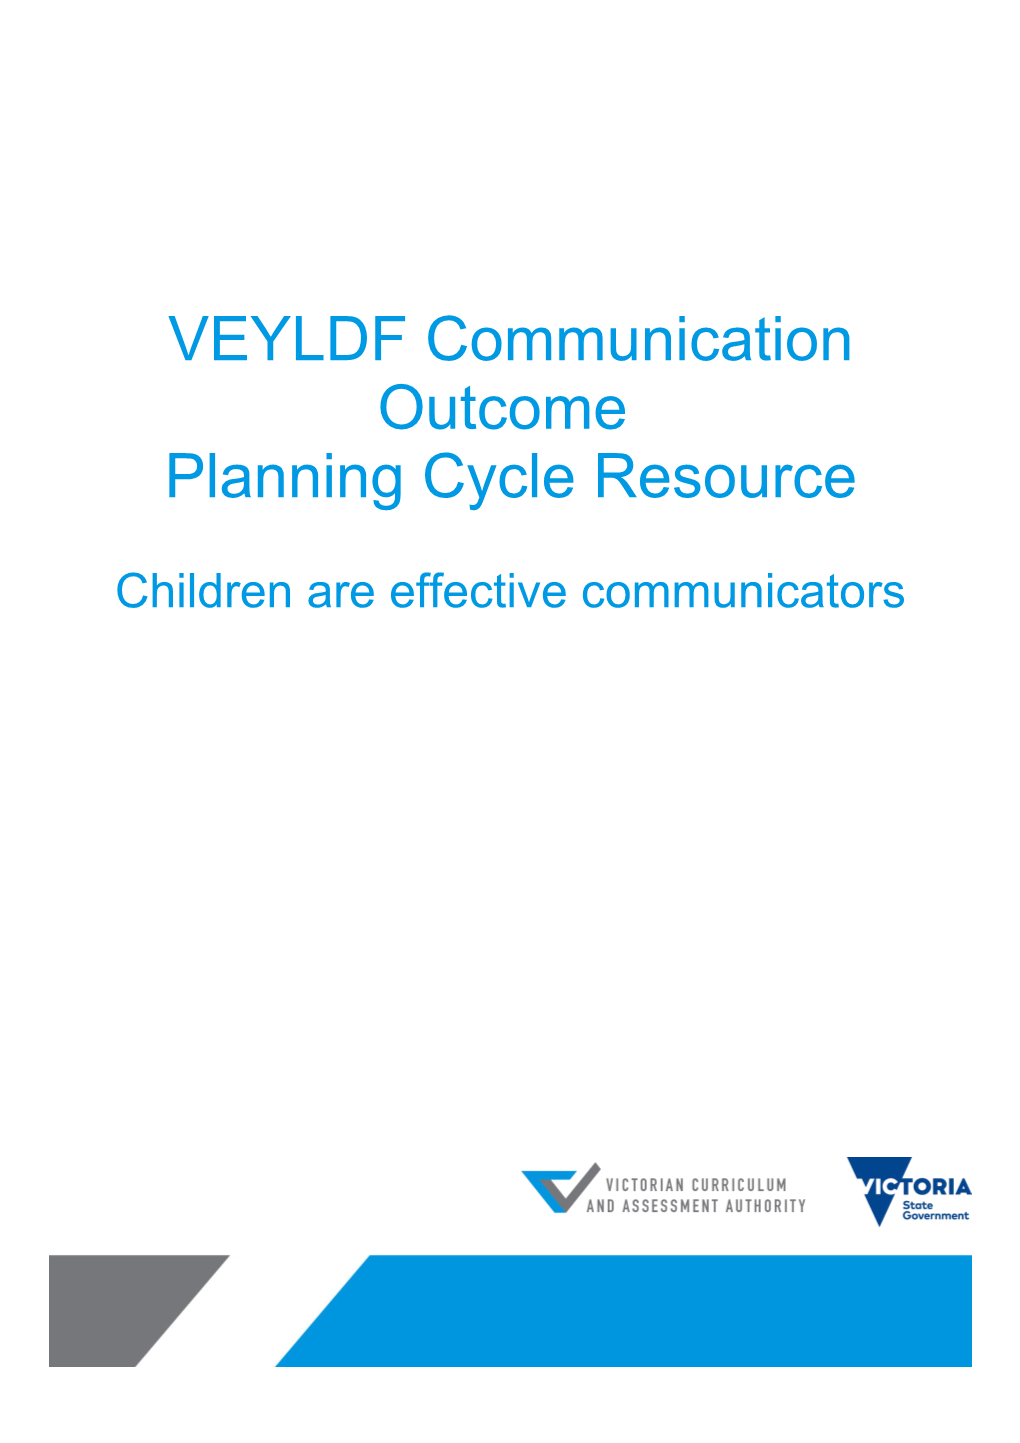 VEYLDF Communication Outcome Planning Cycle Resource